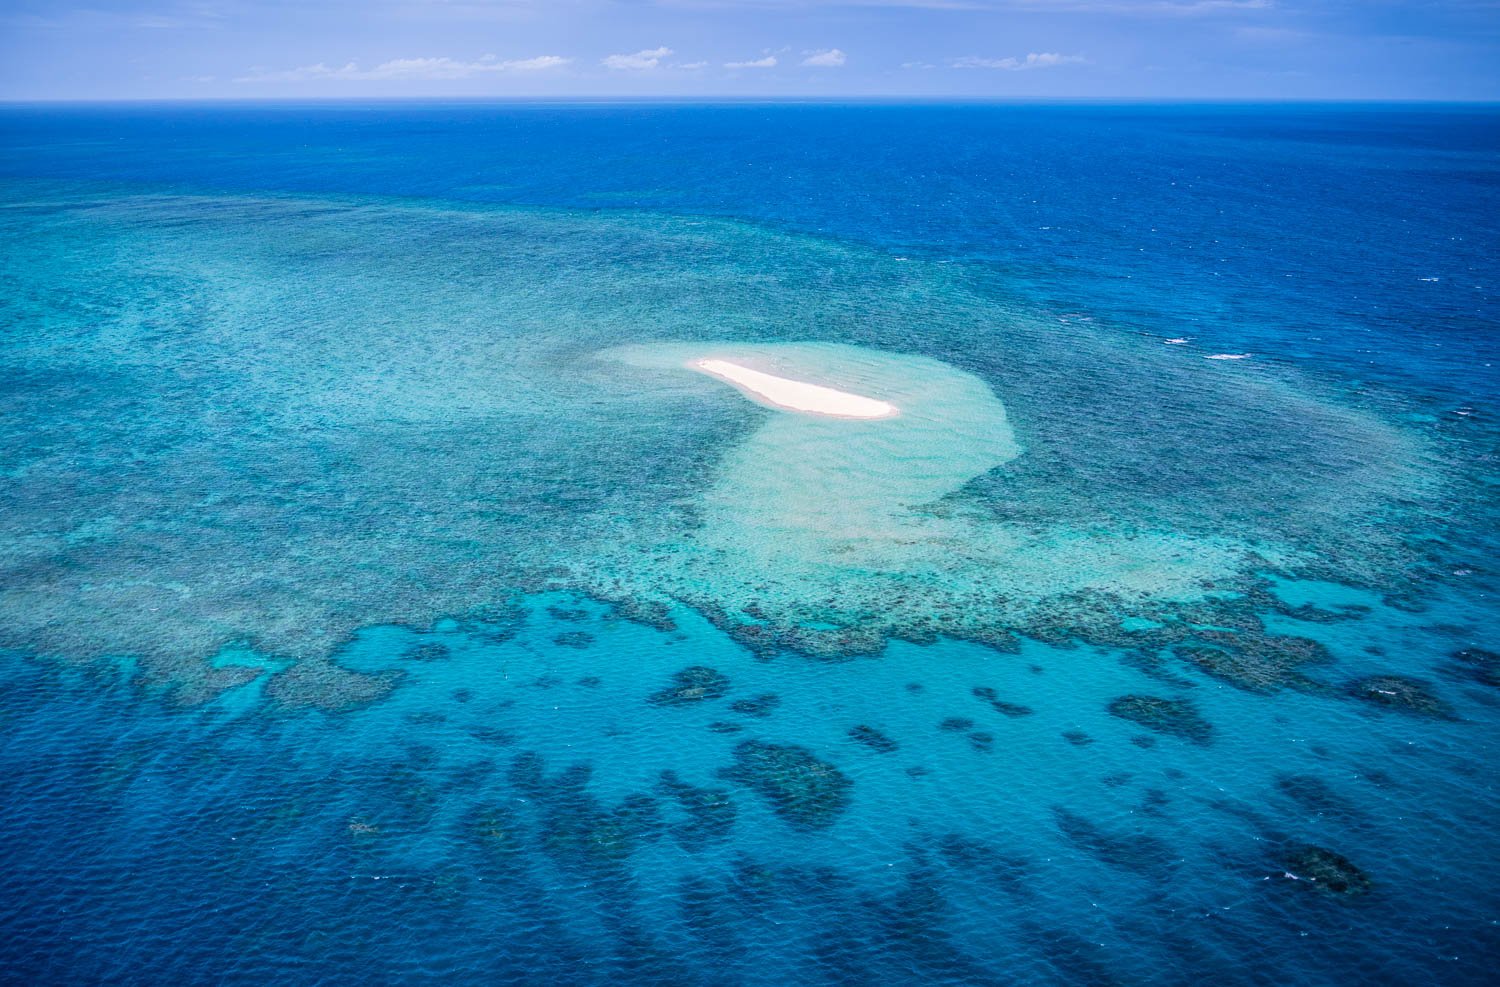 Aerial view of the large sea with greenery underwater, Remote Sandy Cay on the Great Barrier Reef, Far North Queensland